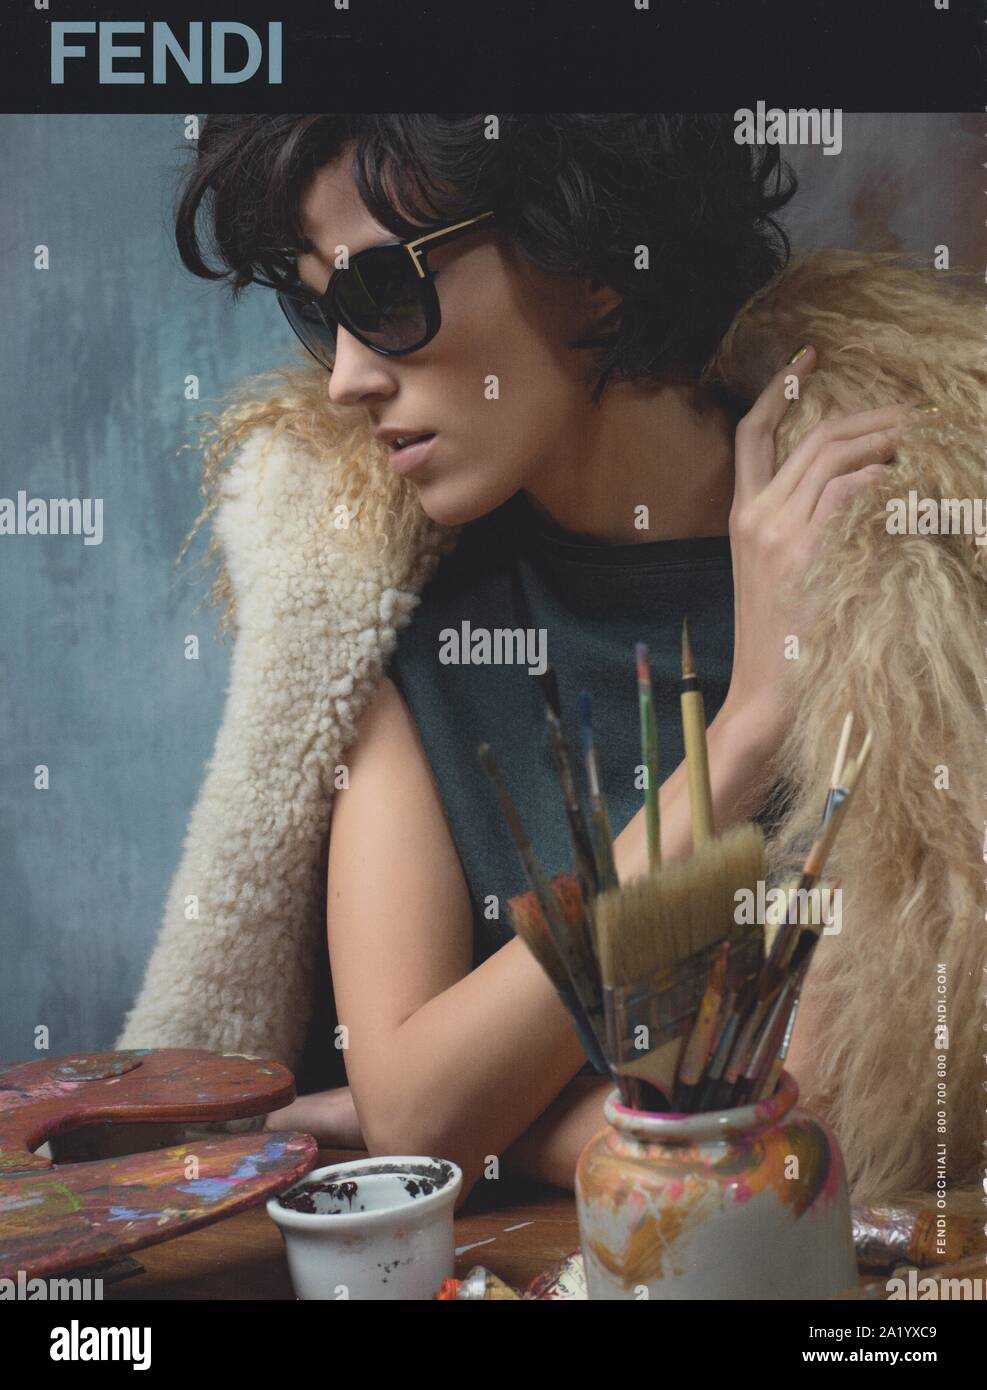 poster advertising FENDI fashion house with Raquel Zimmermann in paper  magazine from 2007 year, advertisement, creative FENDI advert from 2000s  Stock Photo - Alamy